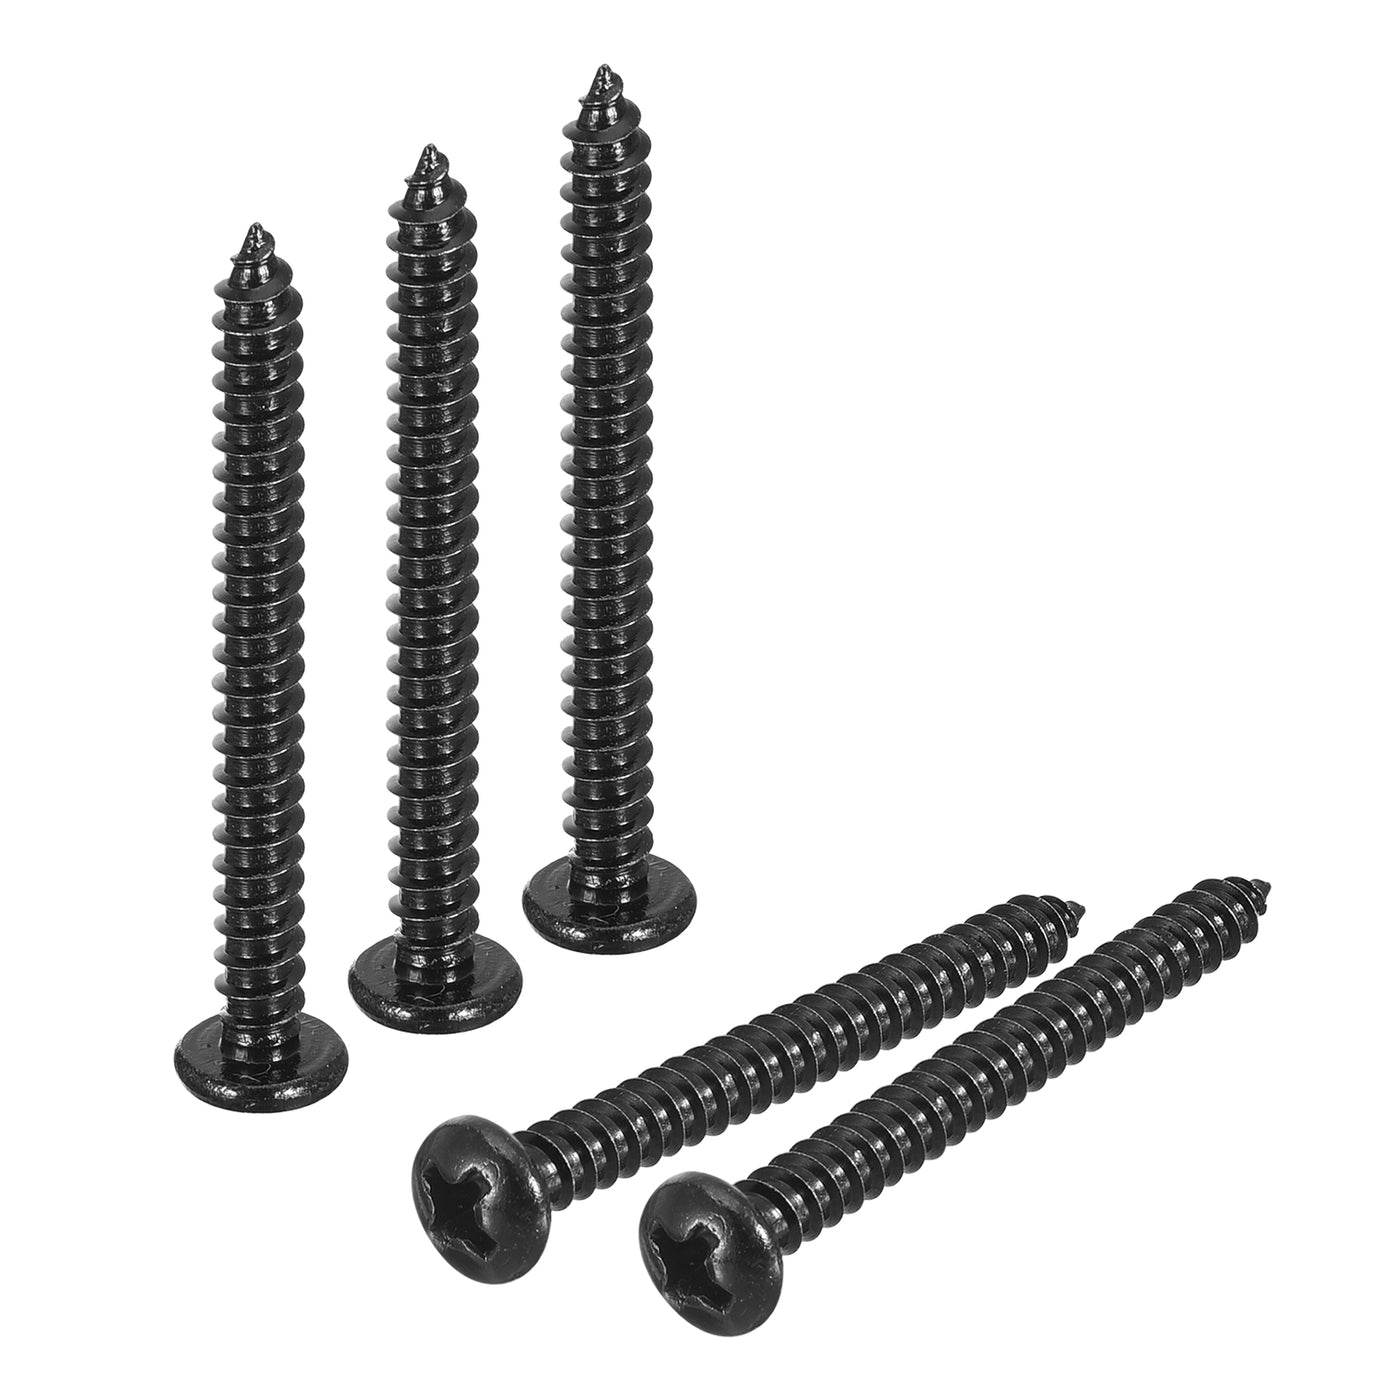 uxcell Uxcell #6 x 1-3/8" Phillips Pan Head Self-tapping Screw, 50pcs - 304 Stainless Steel Round Head Wood Screw Full Thread (Black)